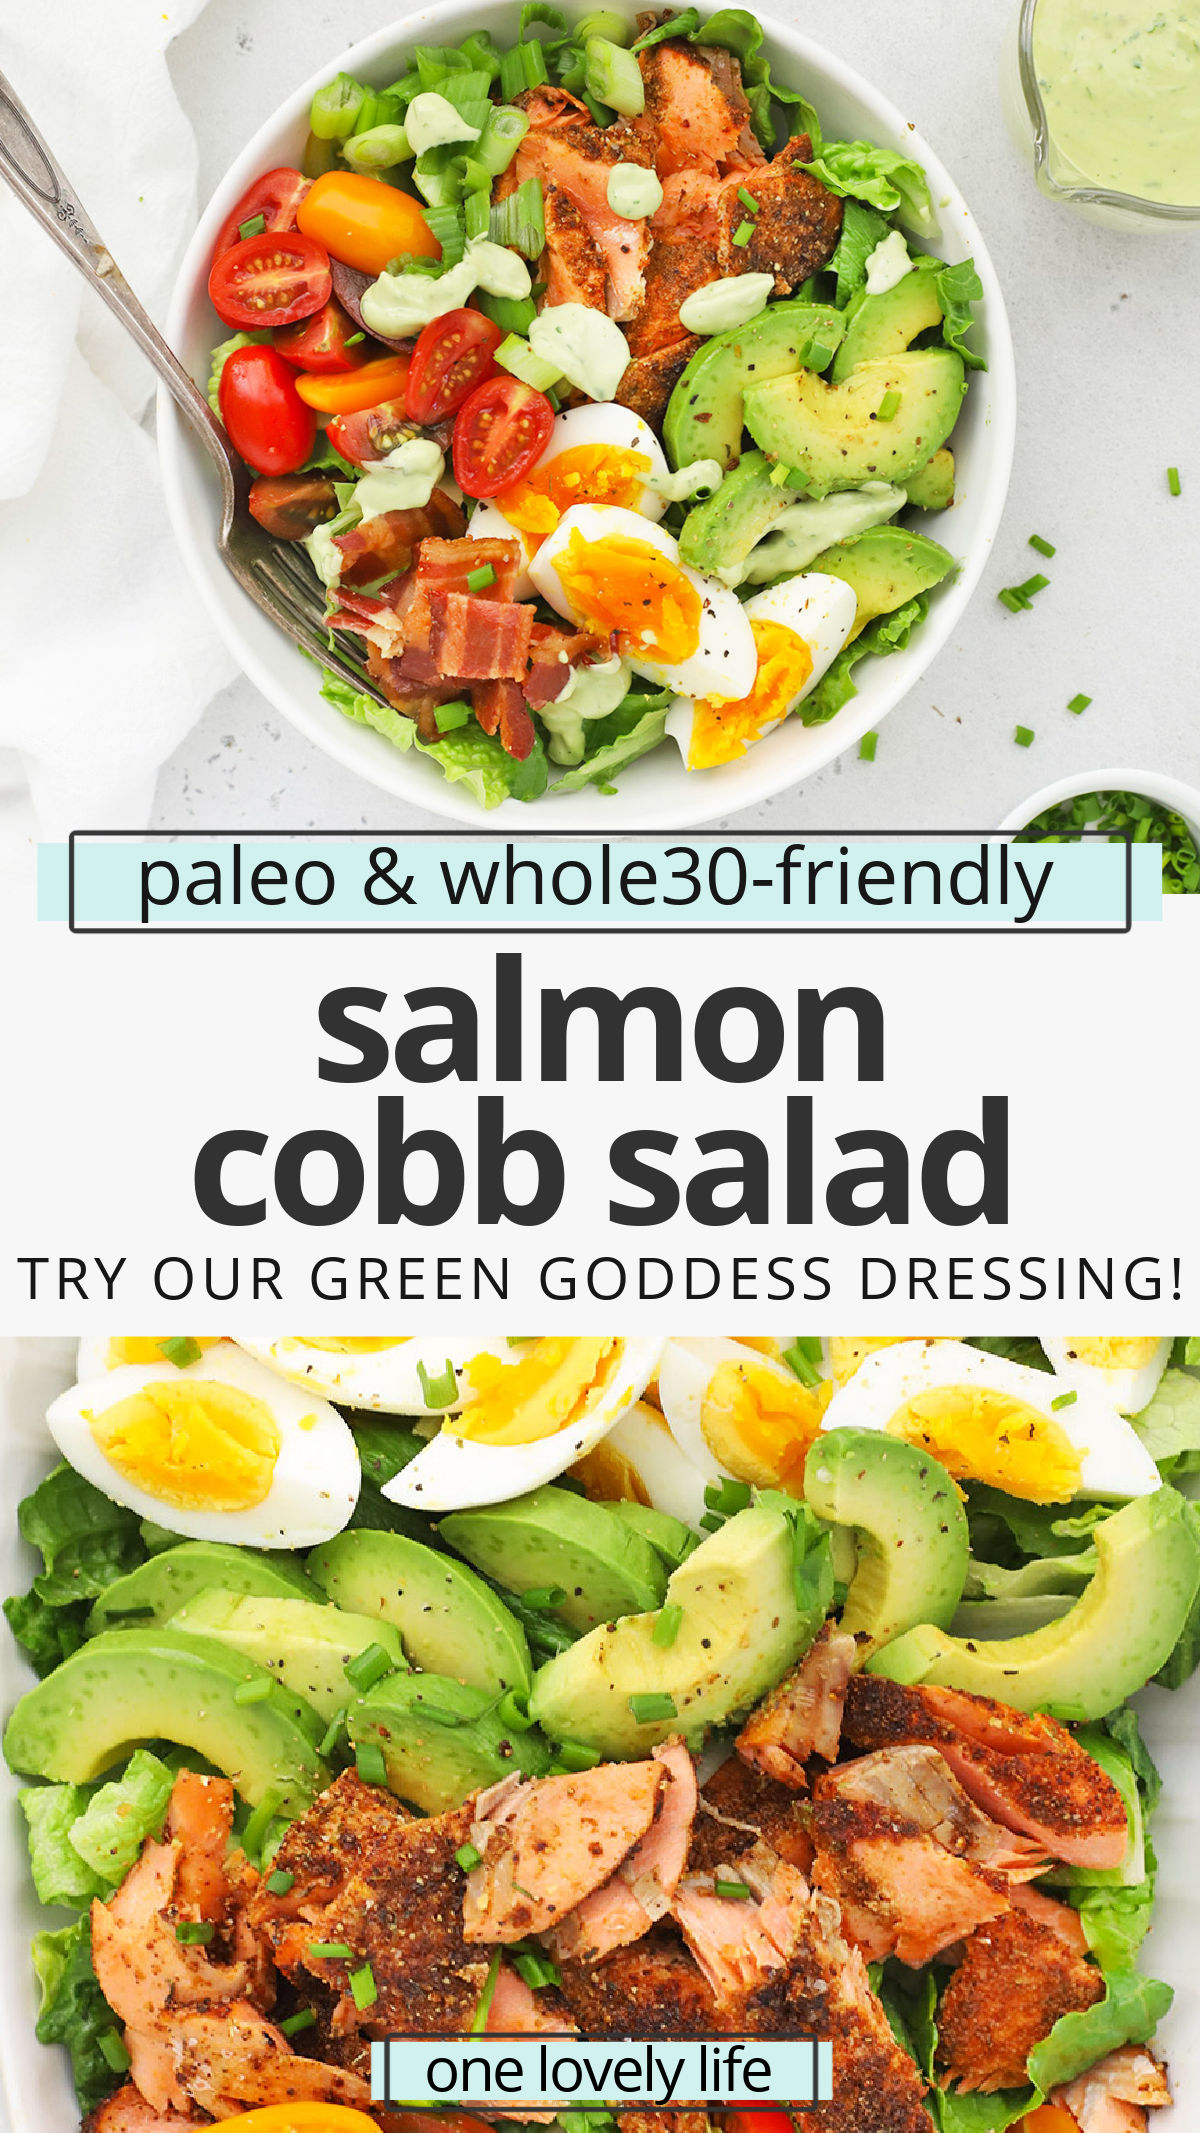 Blackened Salmon Cobb Salad - This salmon Cobb salad full of colorful veggies and finished with a creamy avocado green goddess dressing we can't get enough of! (Paleo, Whole30-Friendly) // Salmon Salad // Blackened Salmon Recipe // Salmon Cobb Recipe // Healthy Dinner #paleo #whole30 #cobbsalad #greengoddess